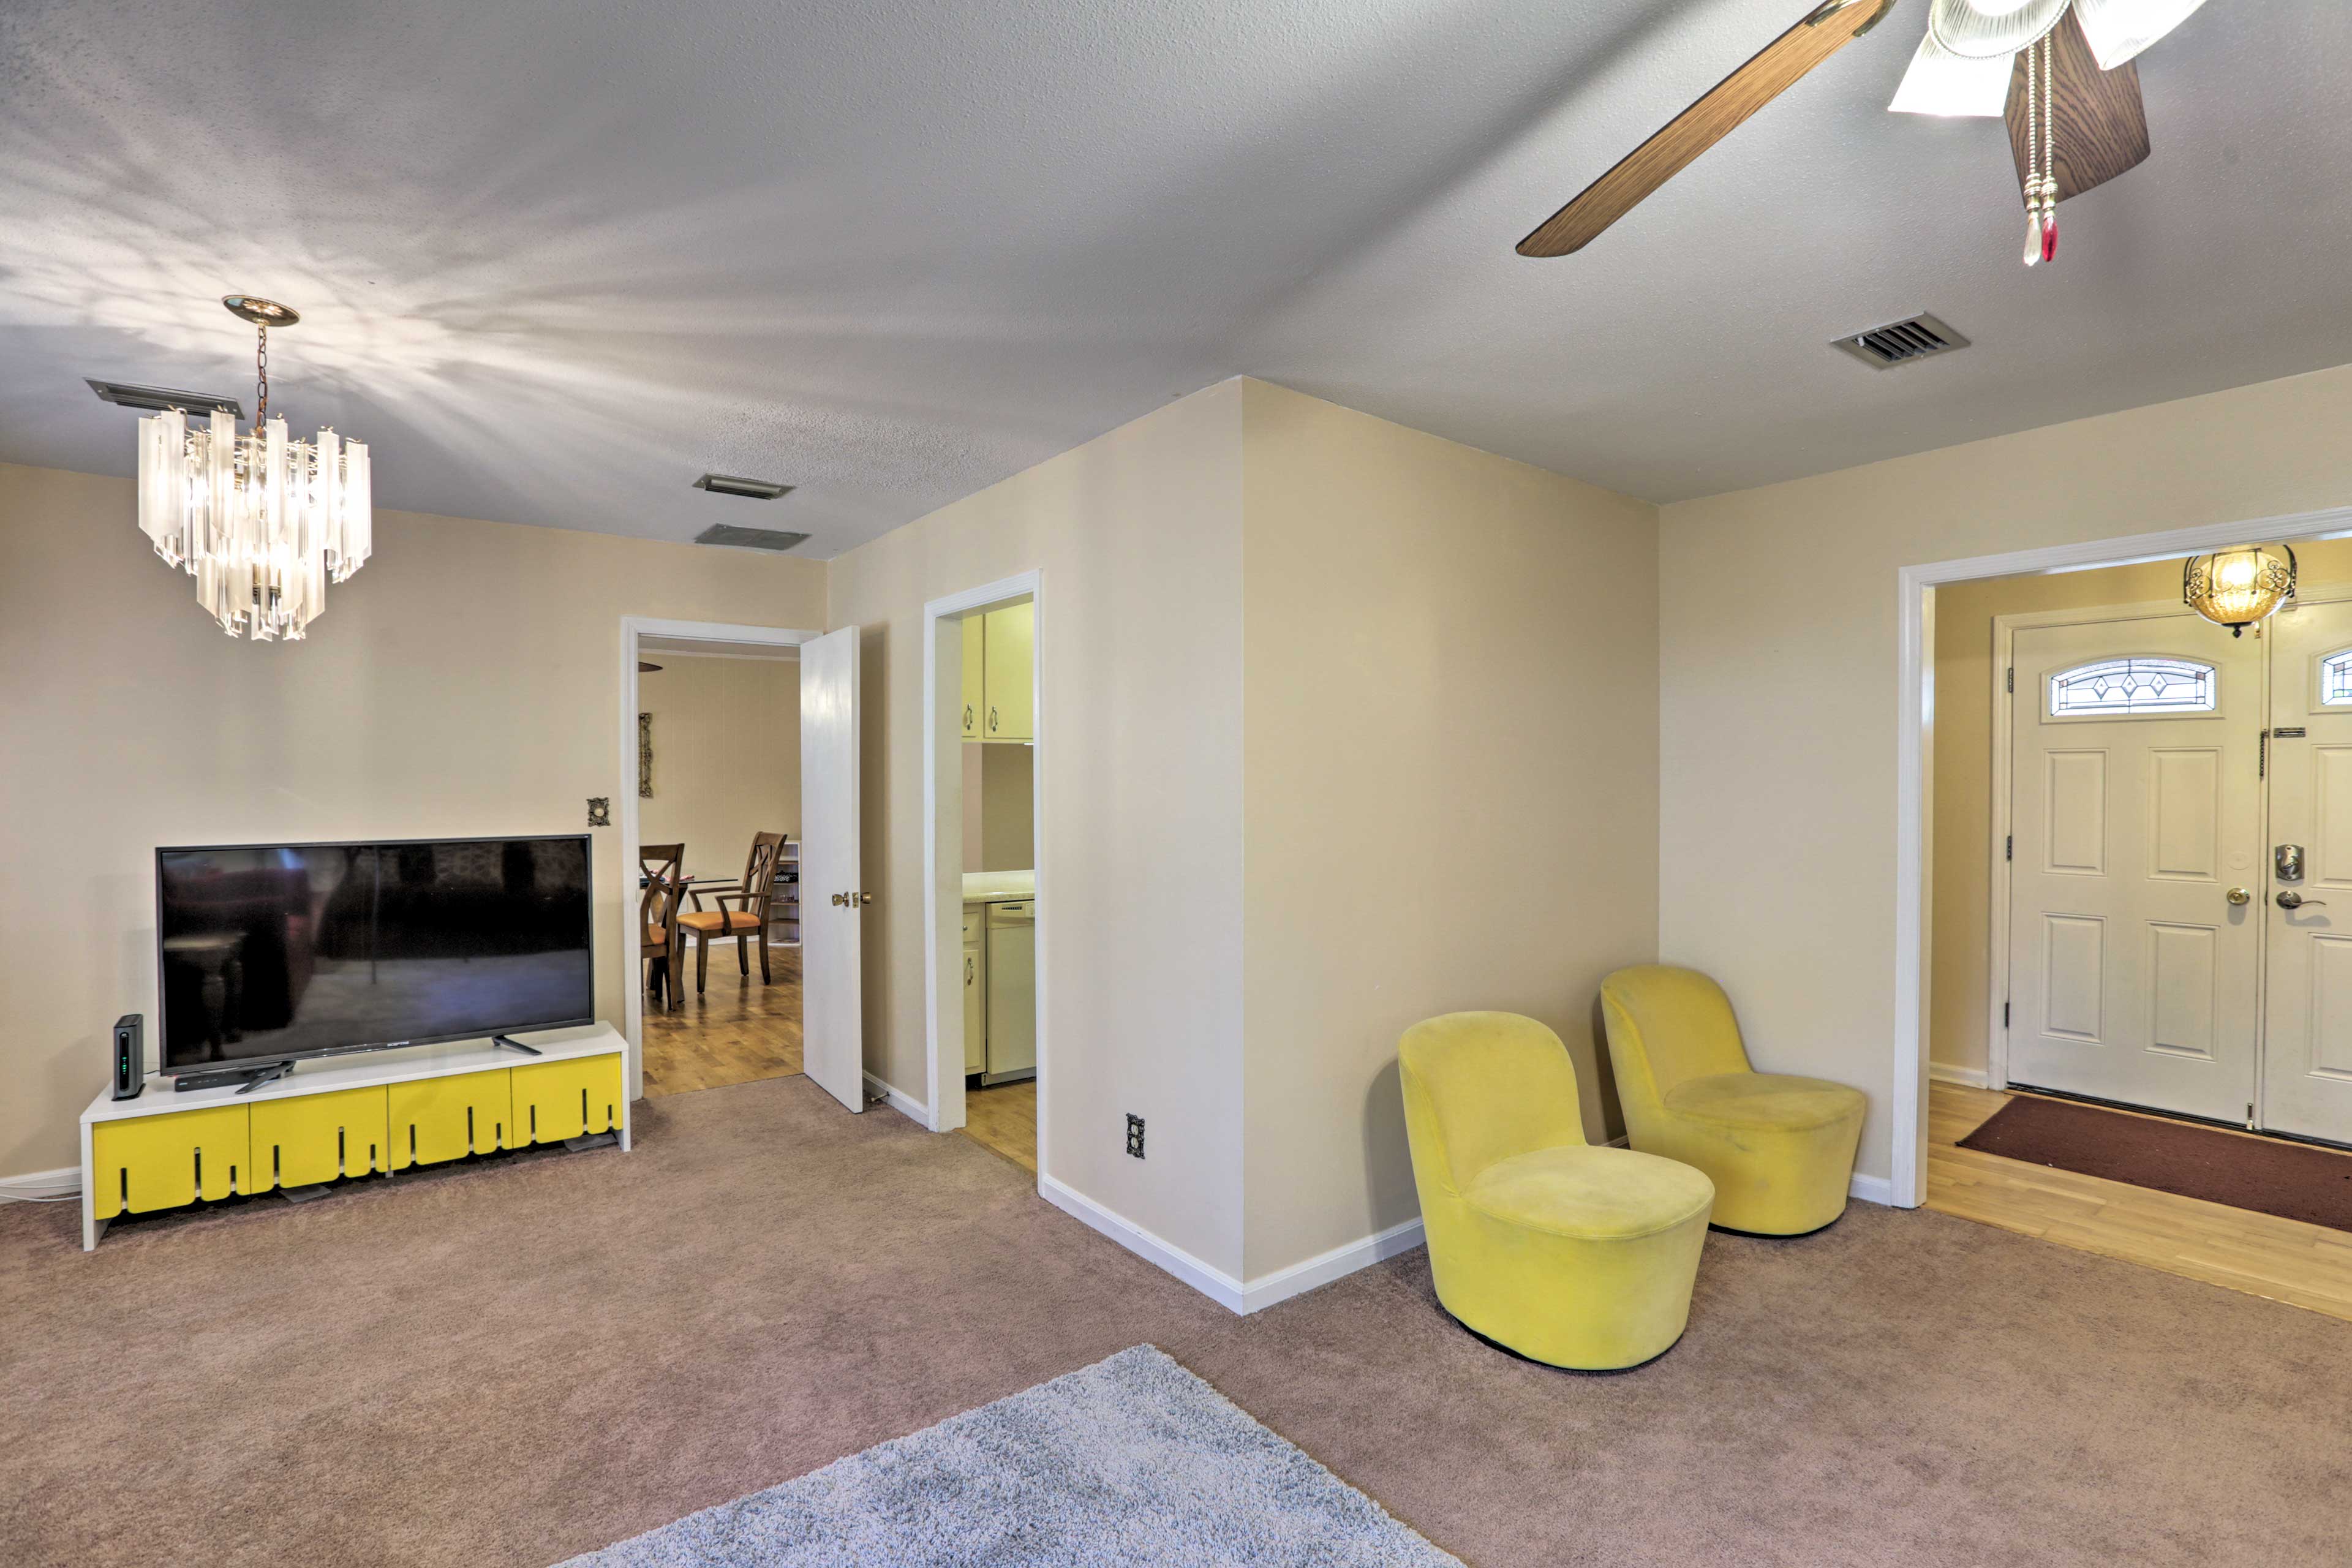 Relax on plush, modern furniture while watching movies on the flat-screen TV.